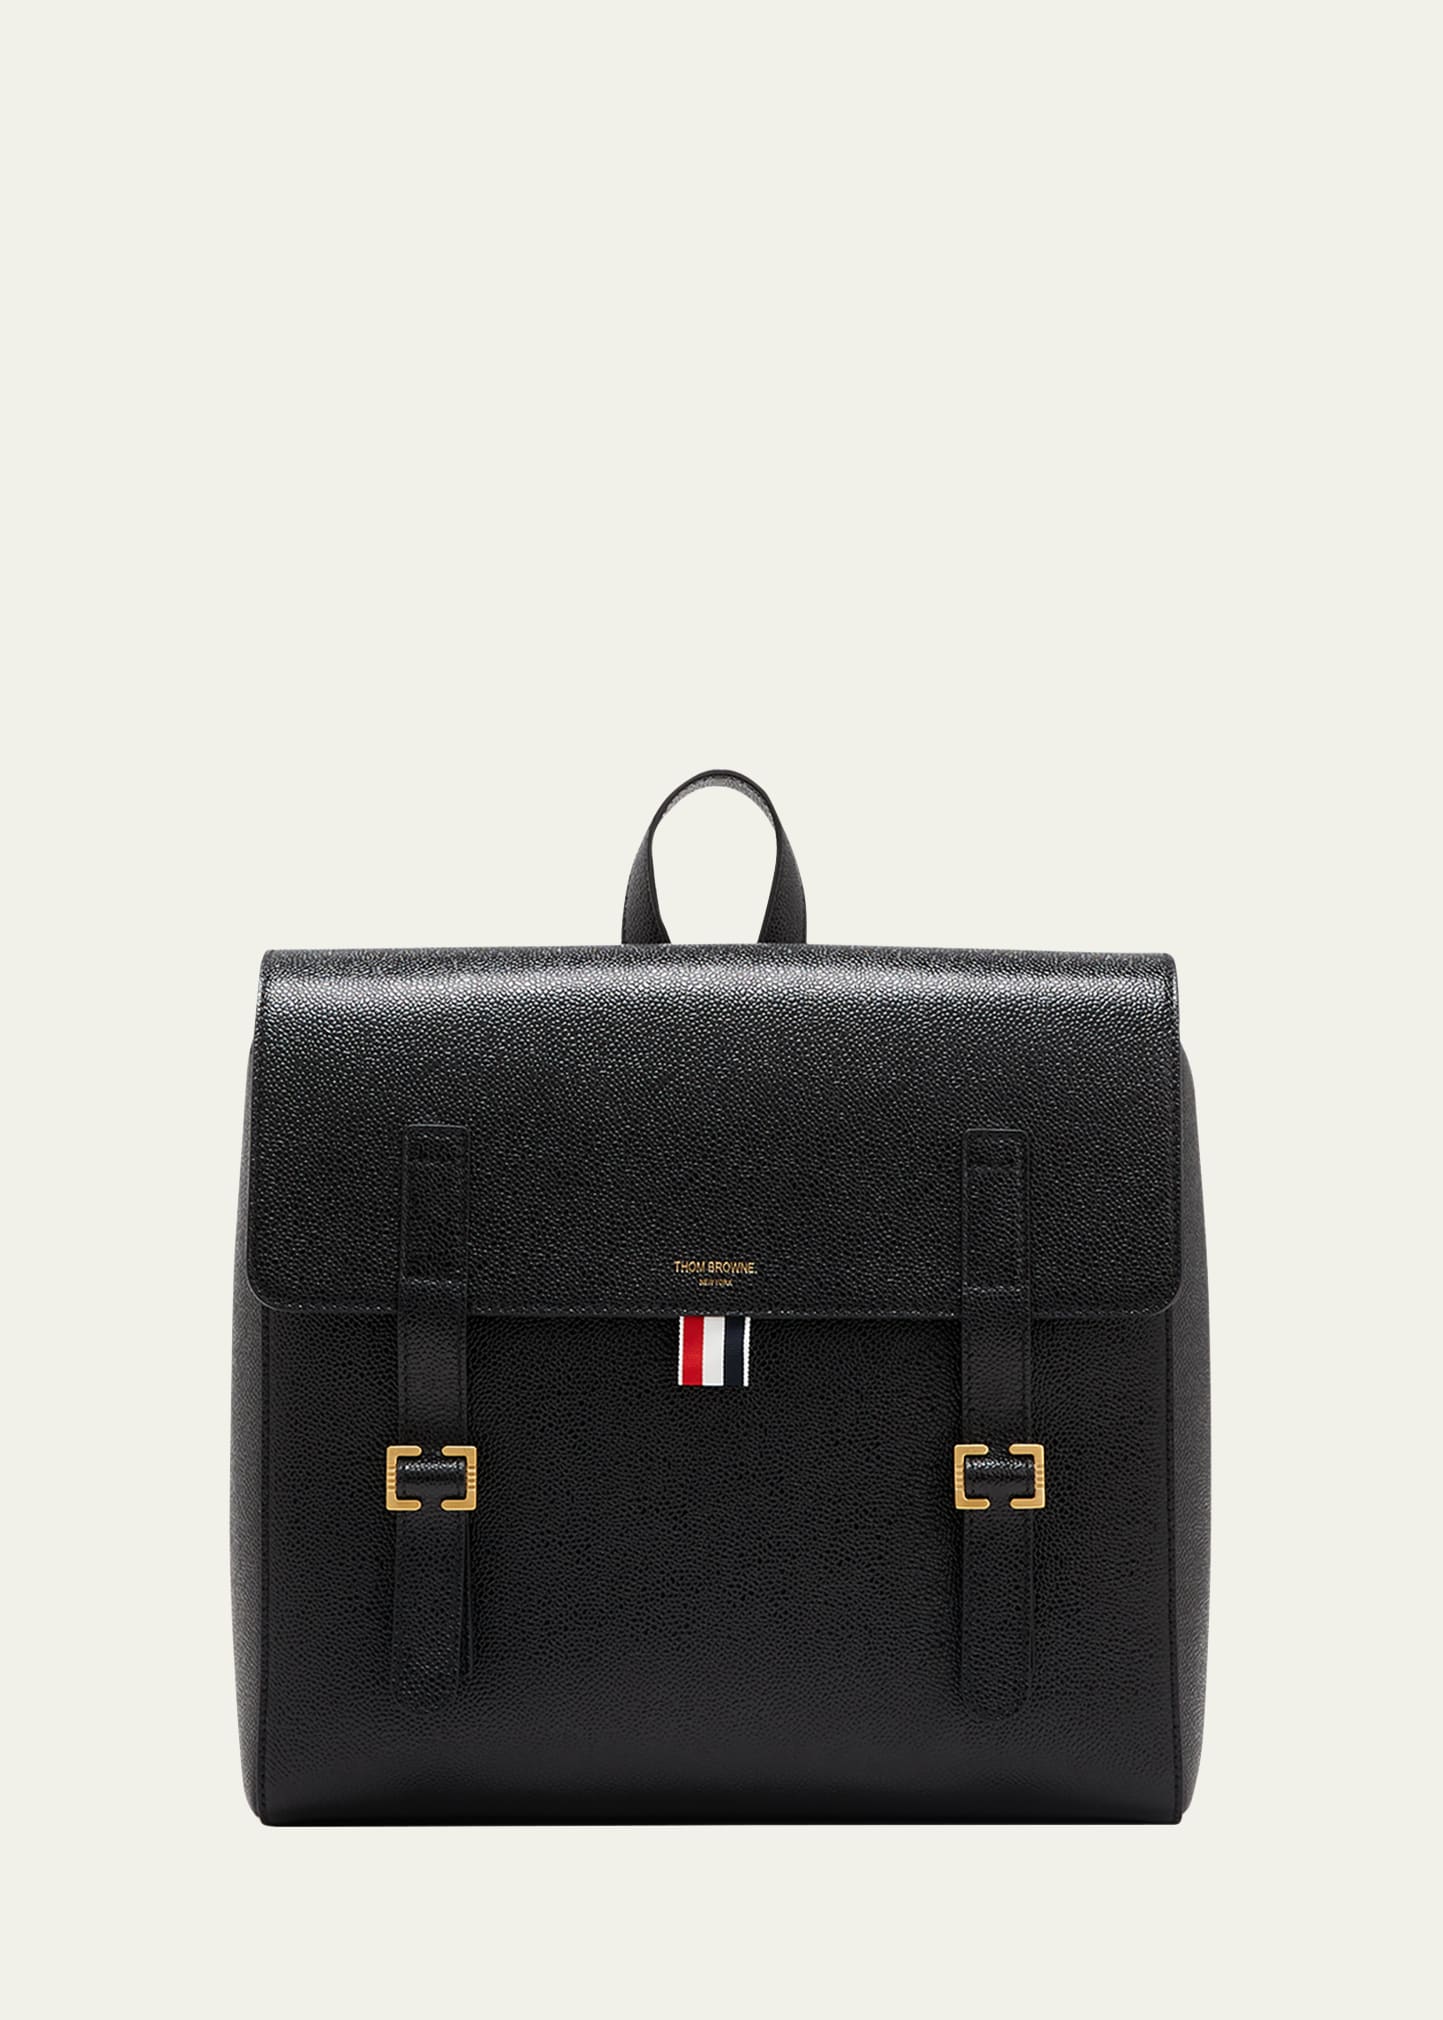 THOM BROWNE MEN'S GRAINED LEATHER BACKPACK